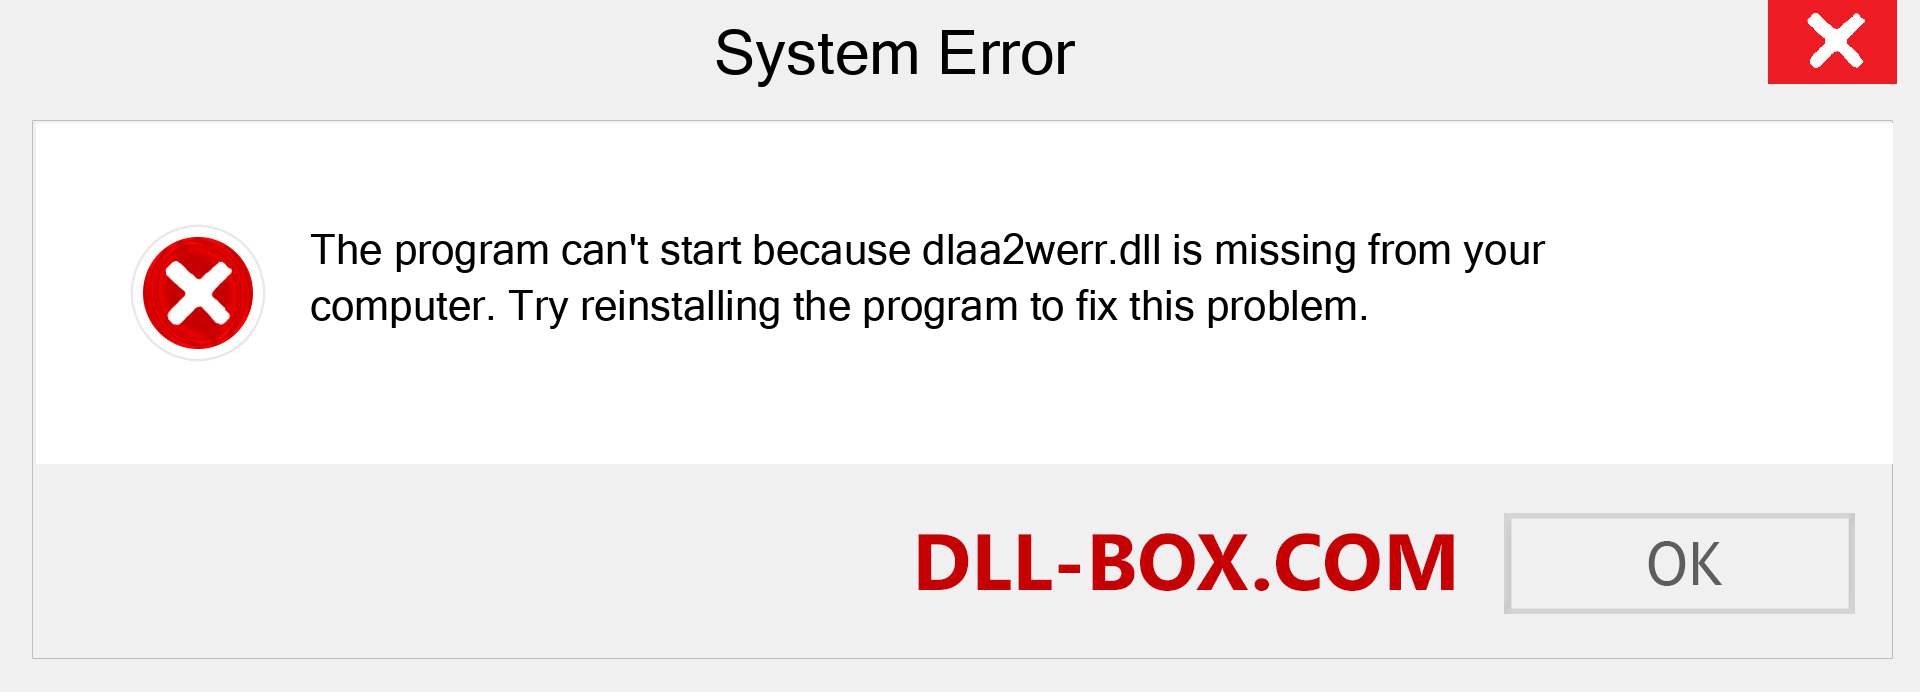  dlaa2werr.dll file is missing?. Download for Windows 7, 8, 10 - Fix  dlaa2werr dll Missing Error on Windows, photos, images